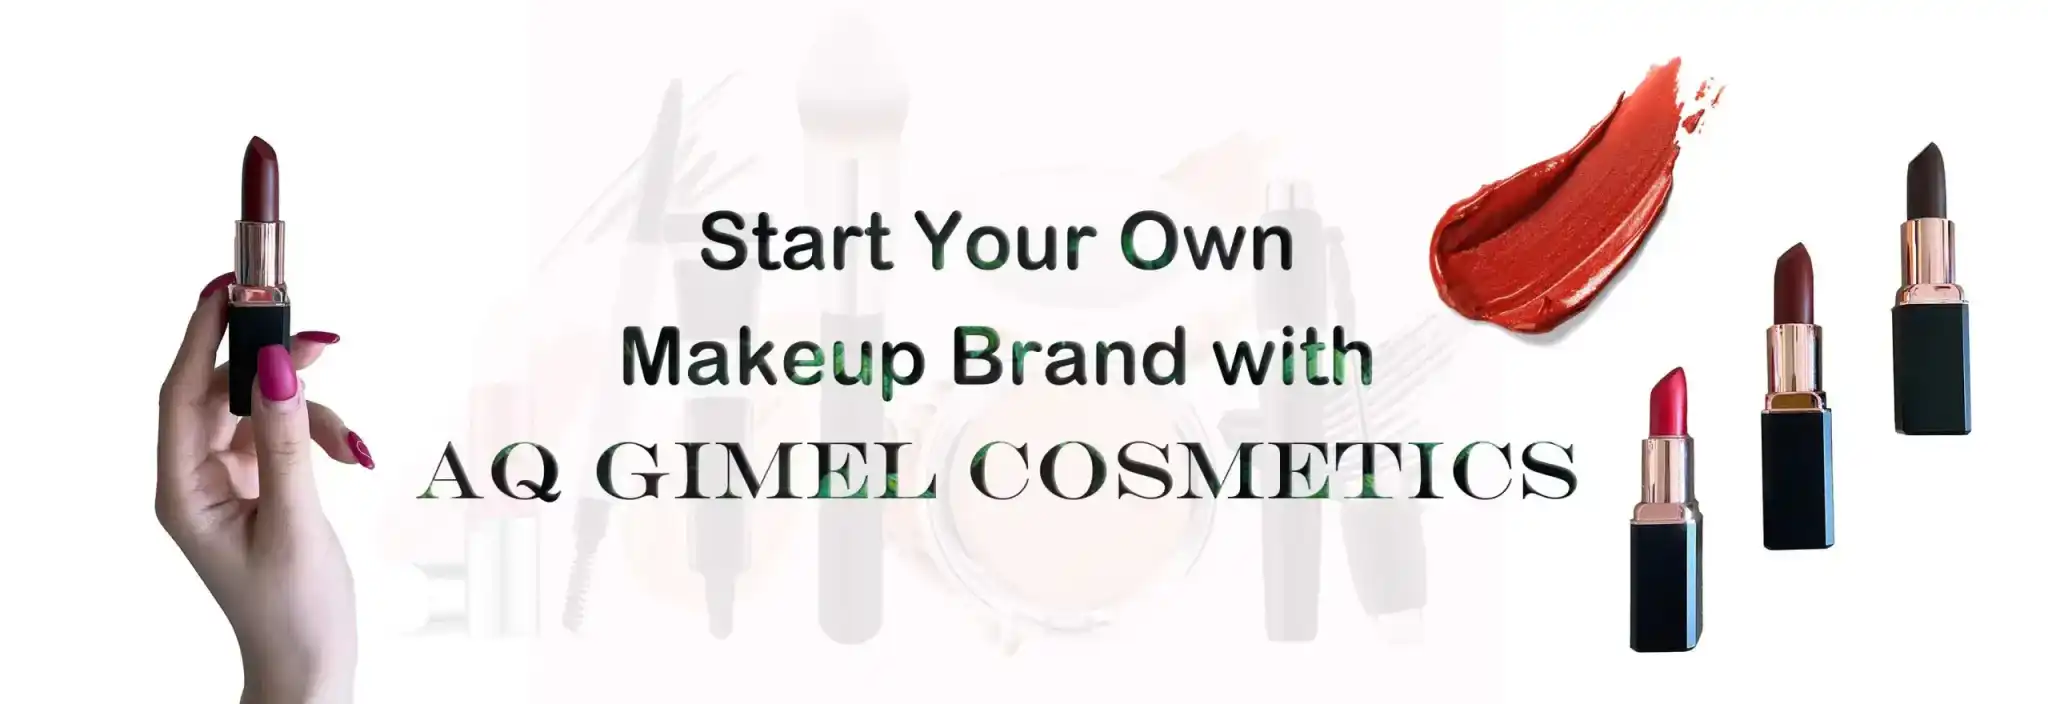 make your own makeup brand with AQ Gimel, the best vegan private label cosmetics, private label vegan makeup manufacturer no minimum